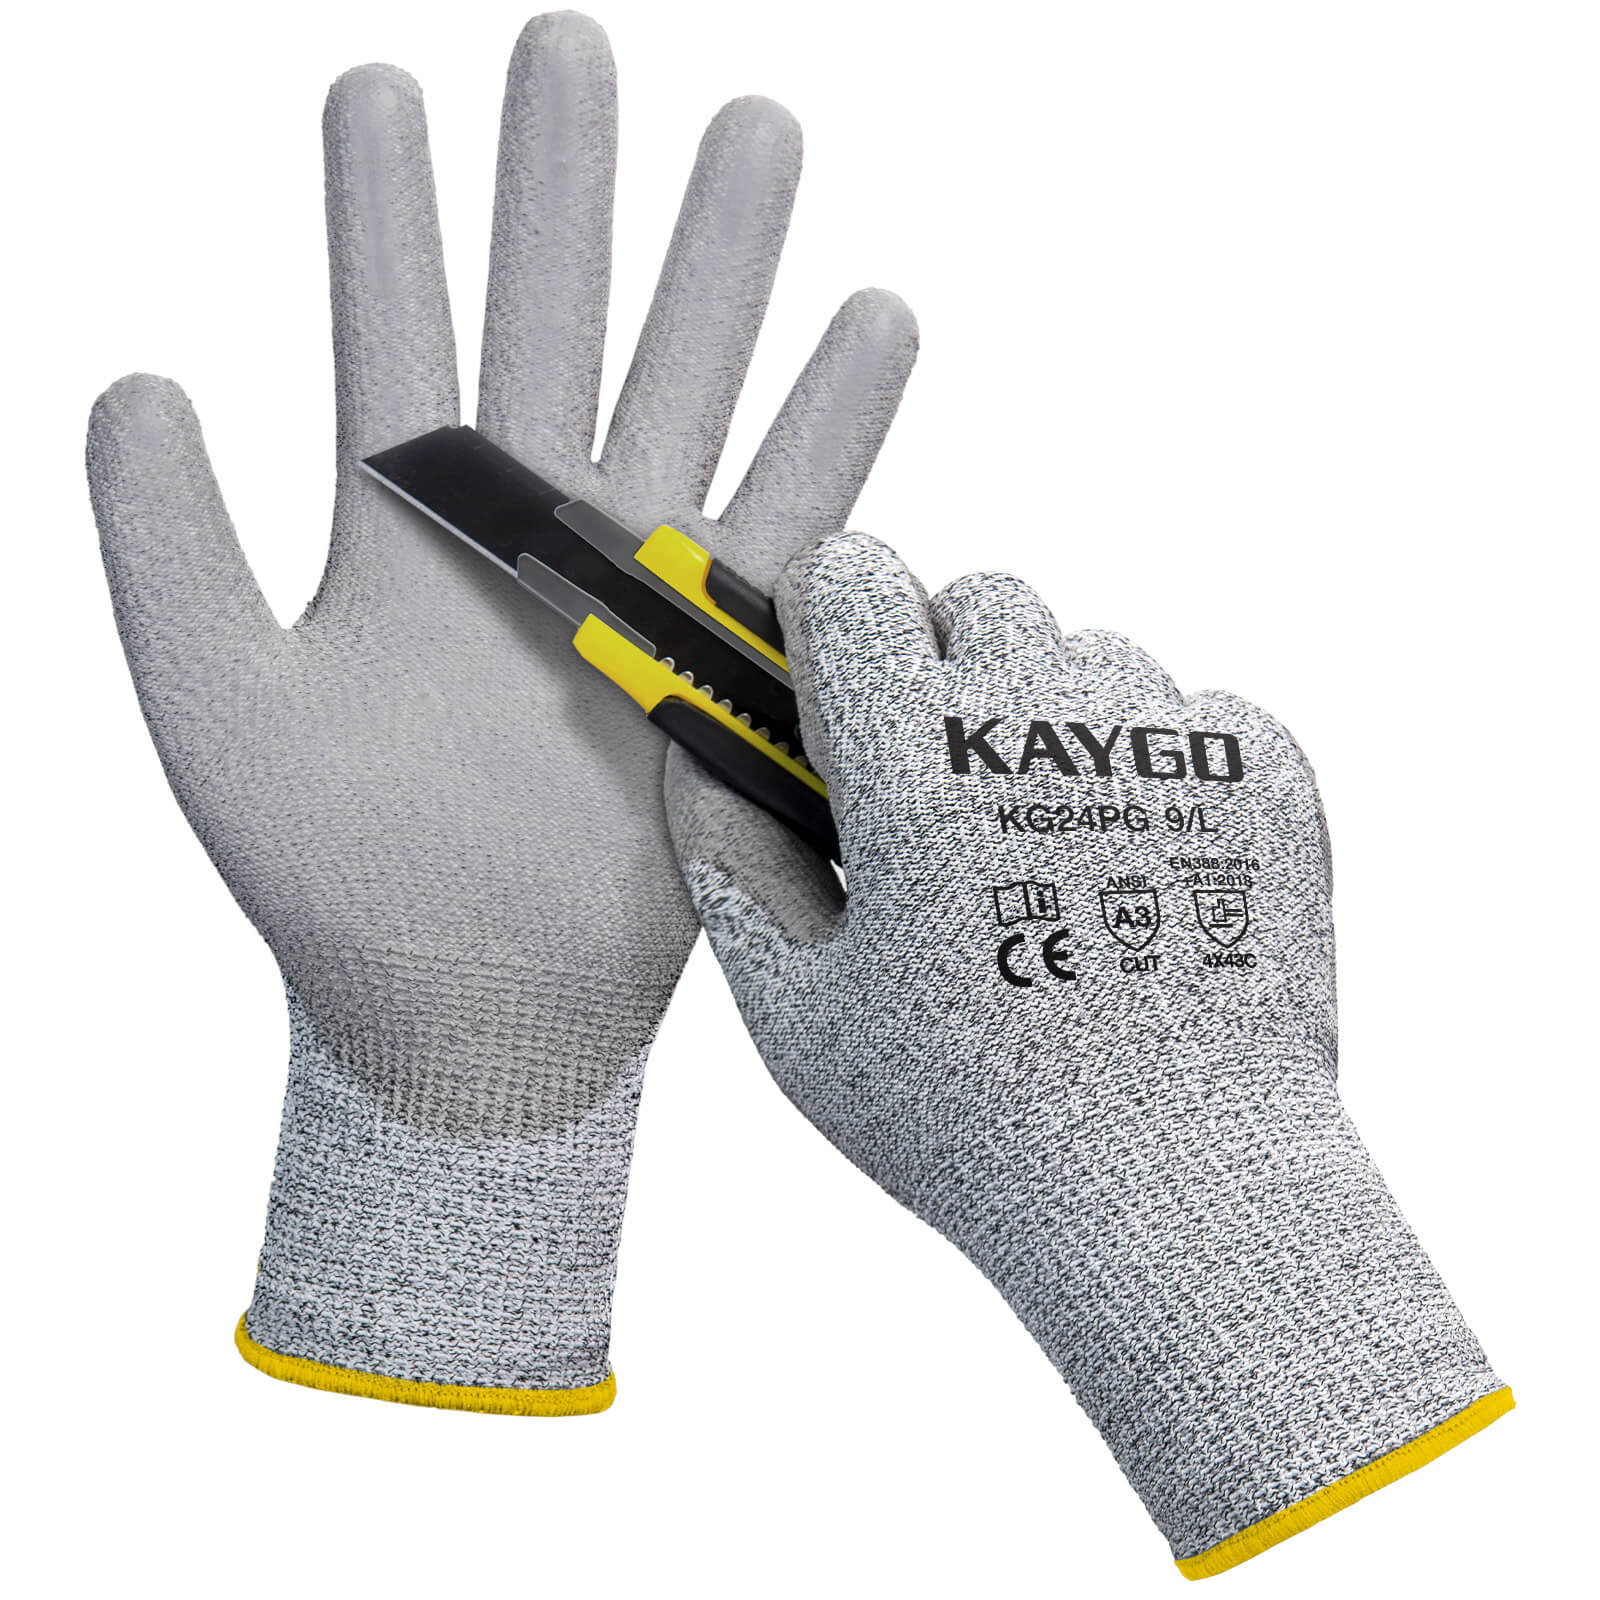 A3 Cut Resistant Gloves with PU Coated Smooth Grip on Palm & Fingers